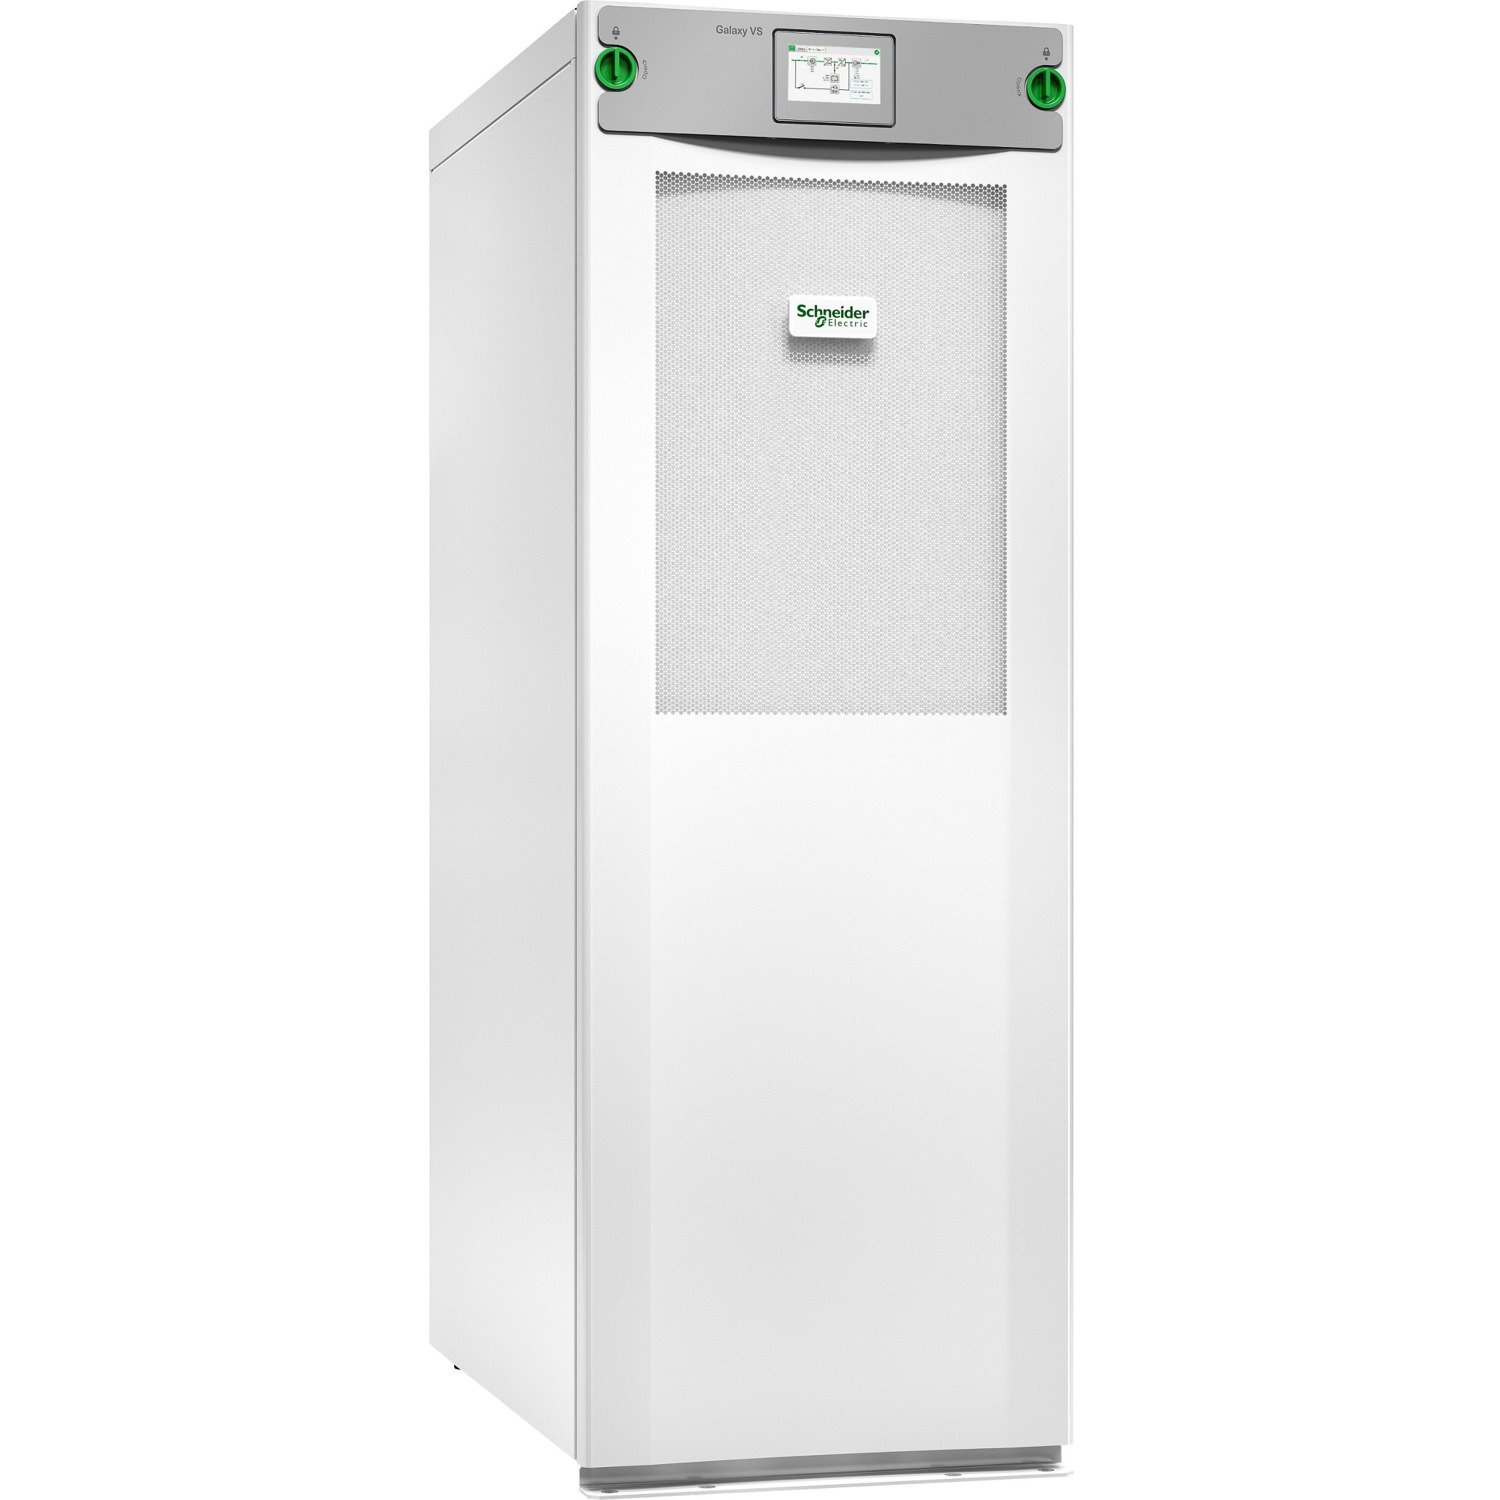 APC by Schneider Electric Galaxy VS Double Conversion Online UPS - 100 kVA - Three Phase